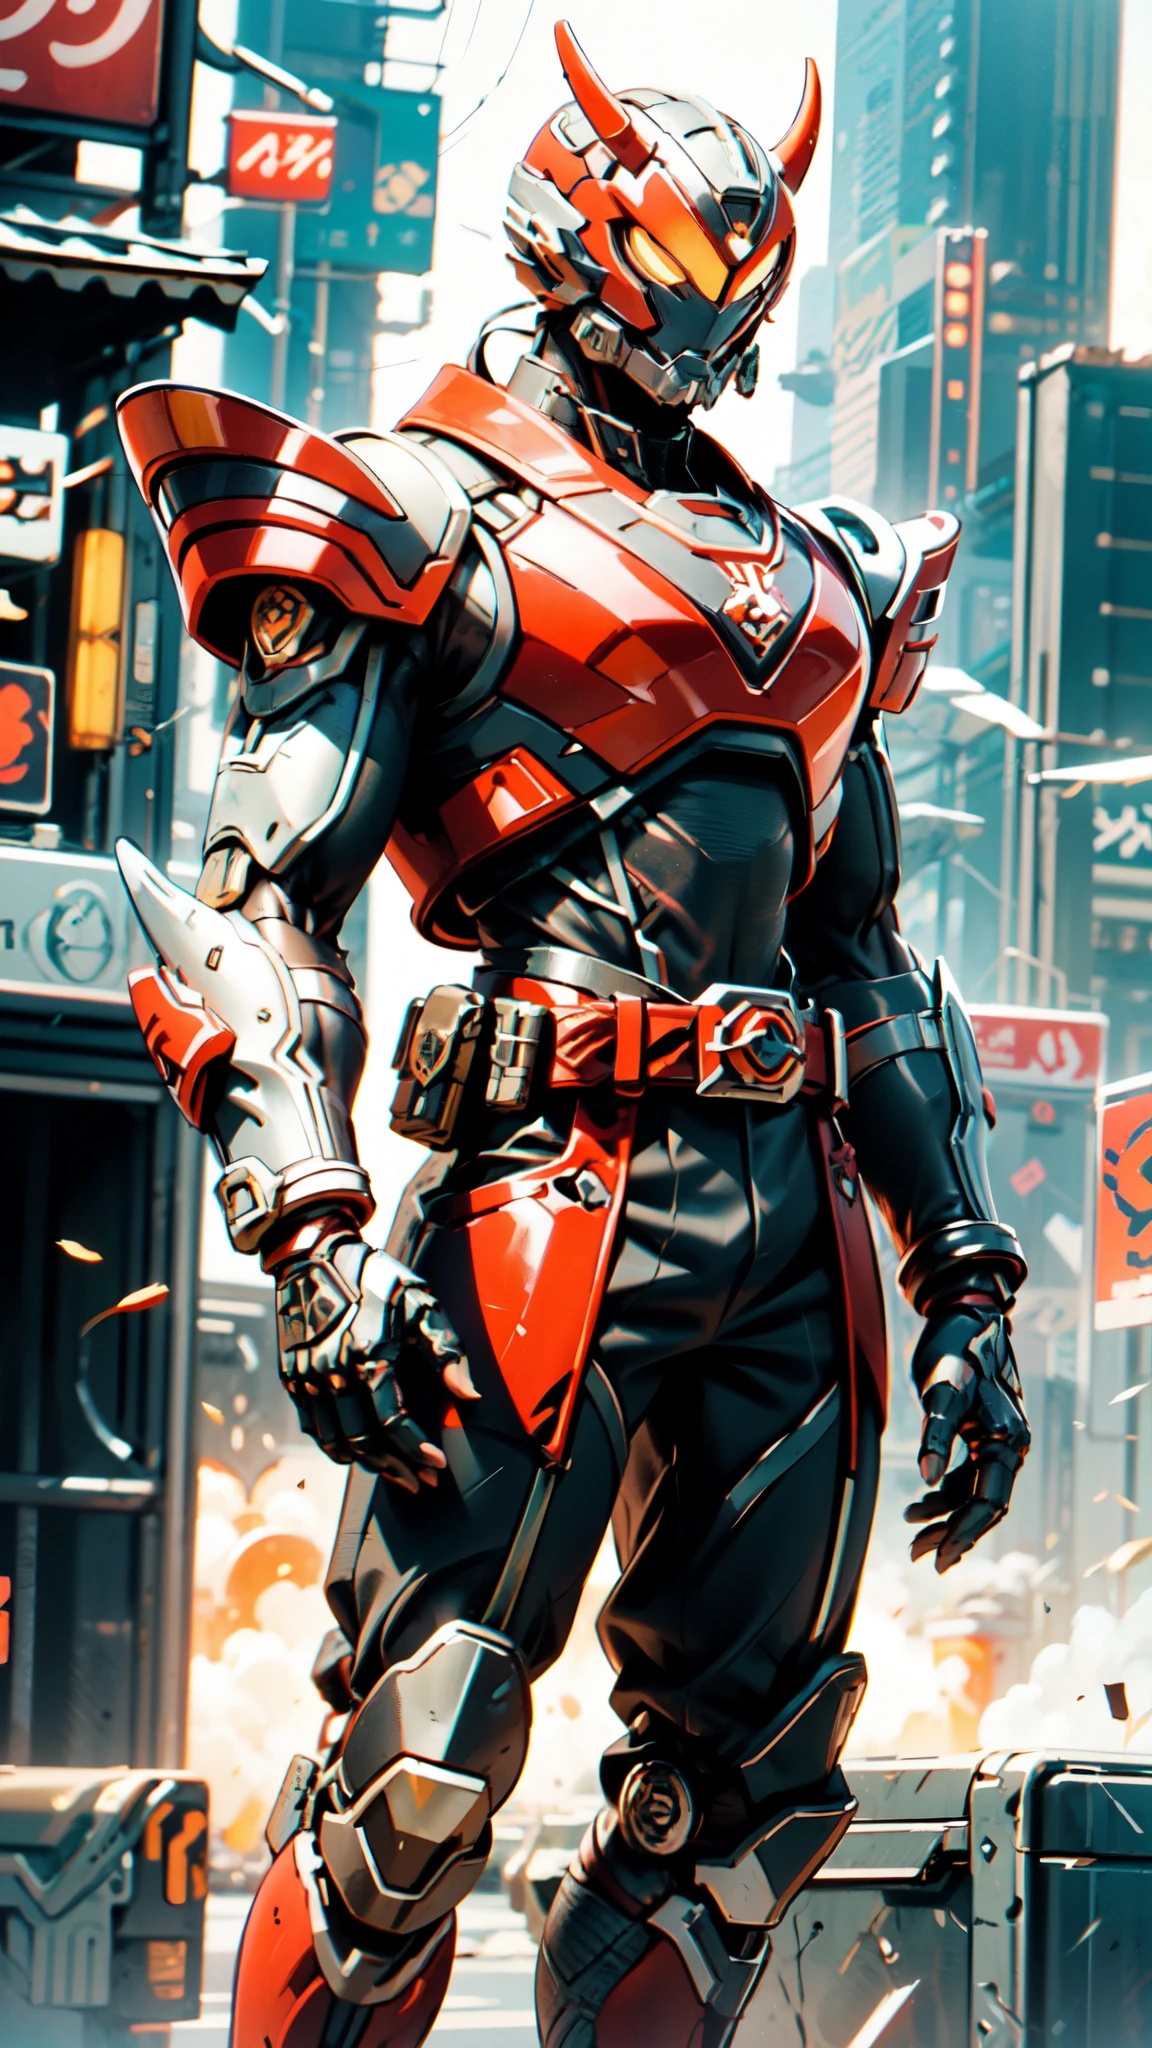 A man wearing a full-face helmet, a fantasy-style biotech armored combat suit, green eyes, (a composite layered chest armor), fully enclosed shoulder guards, matching arm and leg guards, the belt is adorned with 666 mark, (the color scheme is primarily red with yellow and white accents), the design balances heavy with agility, a high-tech bio-mecha armor, (Armor Concept Inspired by Demon, stand on the top of a skyscraper in a futuristic sci-fi city), this character embodies a finely crafted fantasy-surreal style armored hero in anime style, exquisite and mature manga art style, (battle damage, element, plasma, energy, the armor glows), ((male:1.5)), metallic, real texture material, dramatic, high definition, best quality, highres, ultra-detailed, ultra-fine painting, extremely delicate, professional, perfect body proportions, golden ratio, anatomically correct, symmetrical face, extremely detailed eyes and face, high quality eyes, creativity, RAW photo, UHD, 32k, Natural light, cinematic lighting, masterpiece-anatomy-perfect, masterpiece:1.5